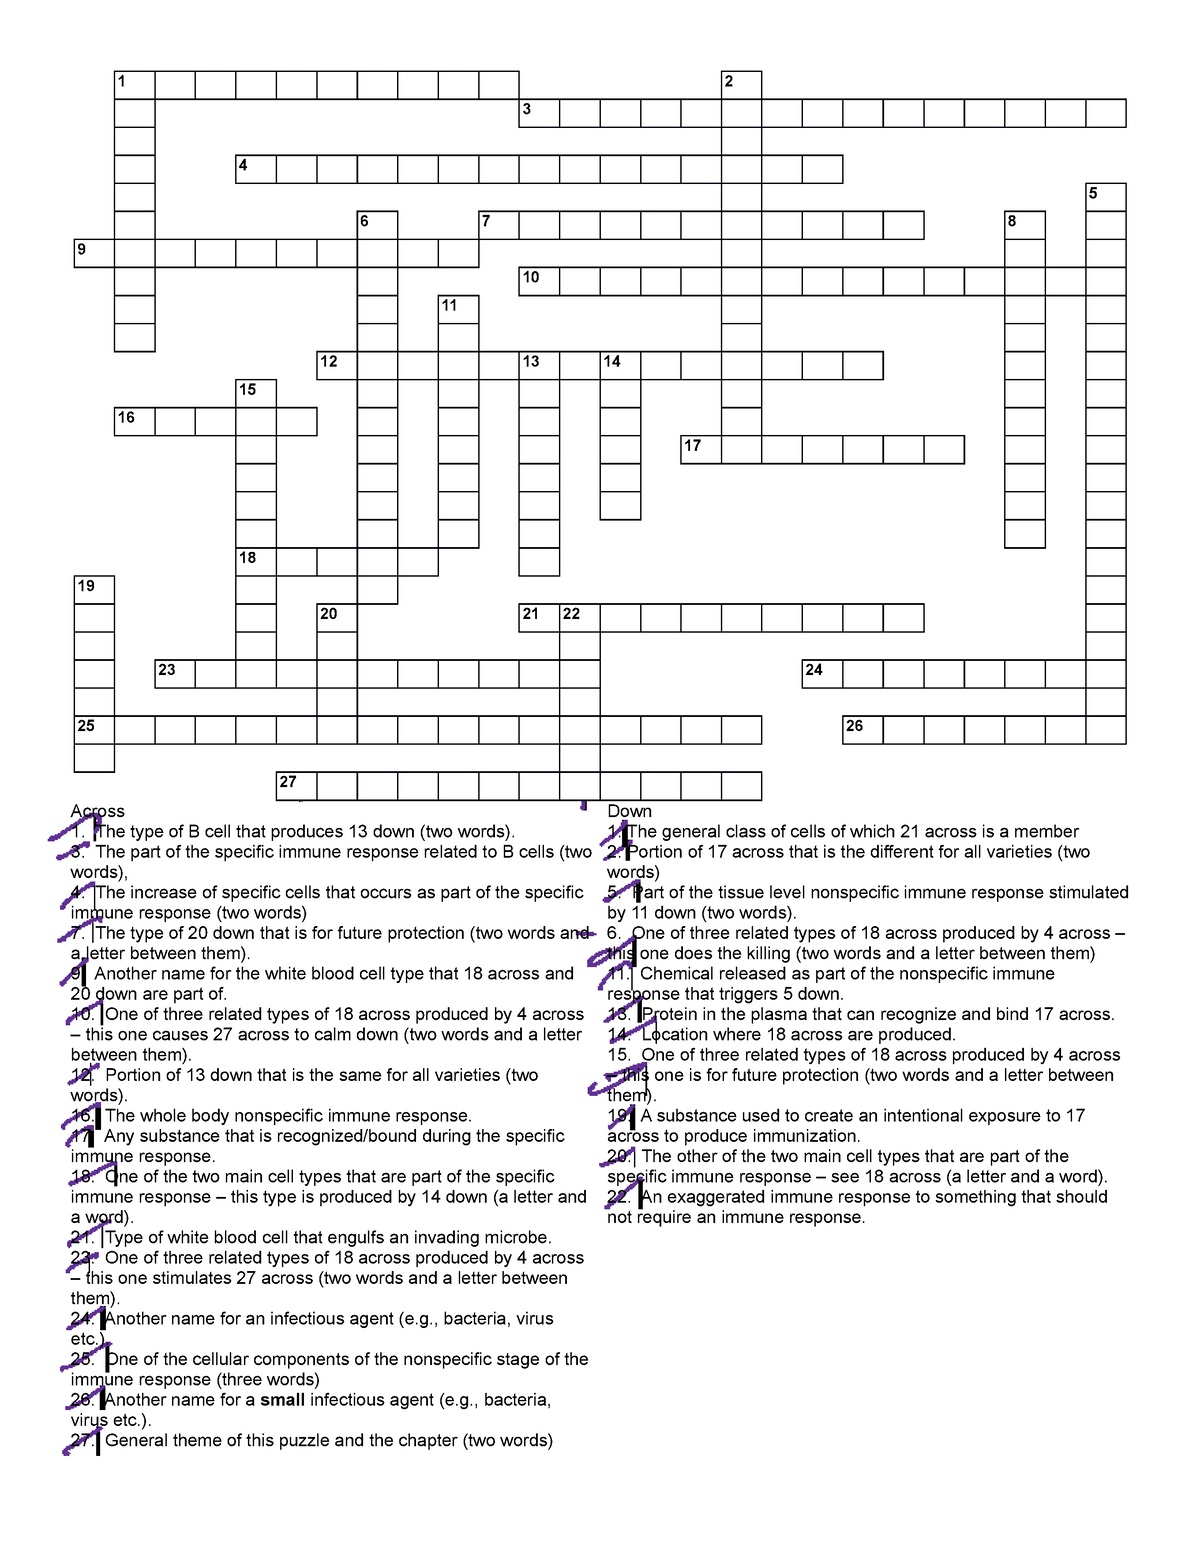 Immune 2 crossword puzzle for ch 3 extra credit Across The type of B